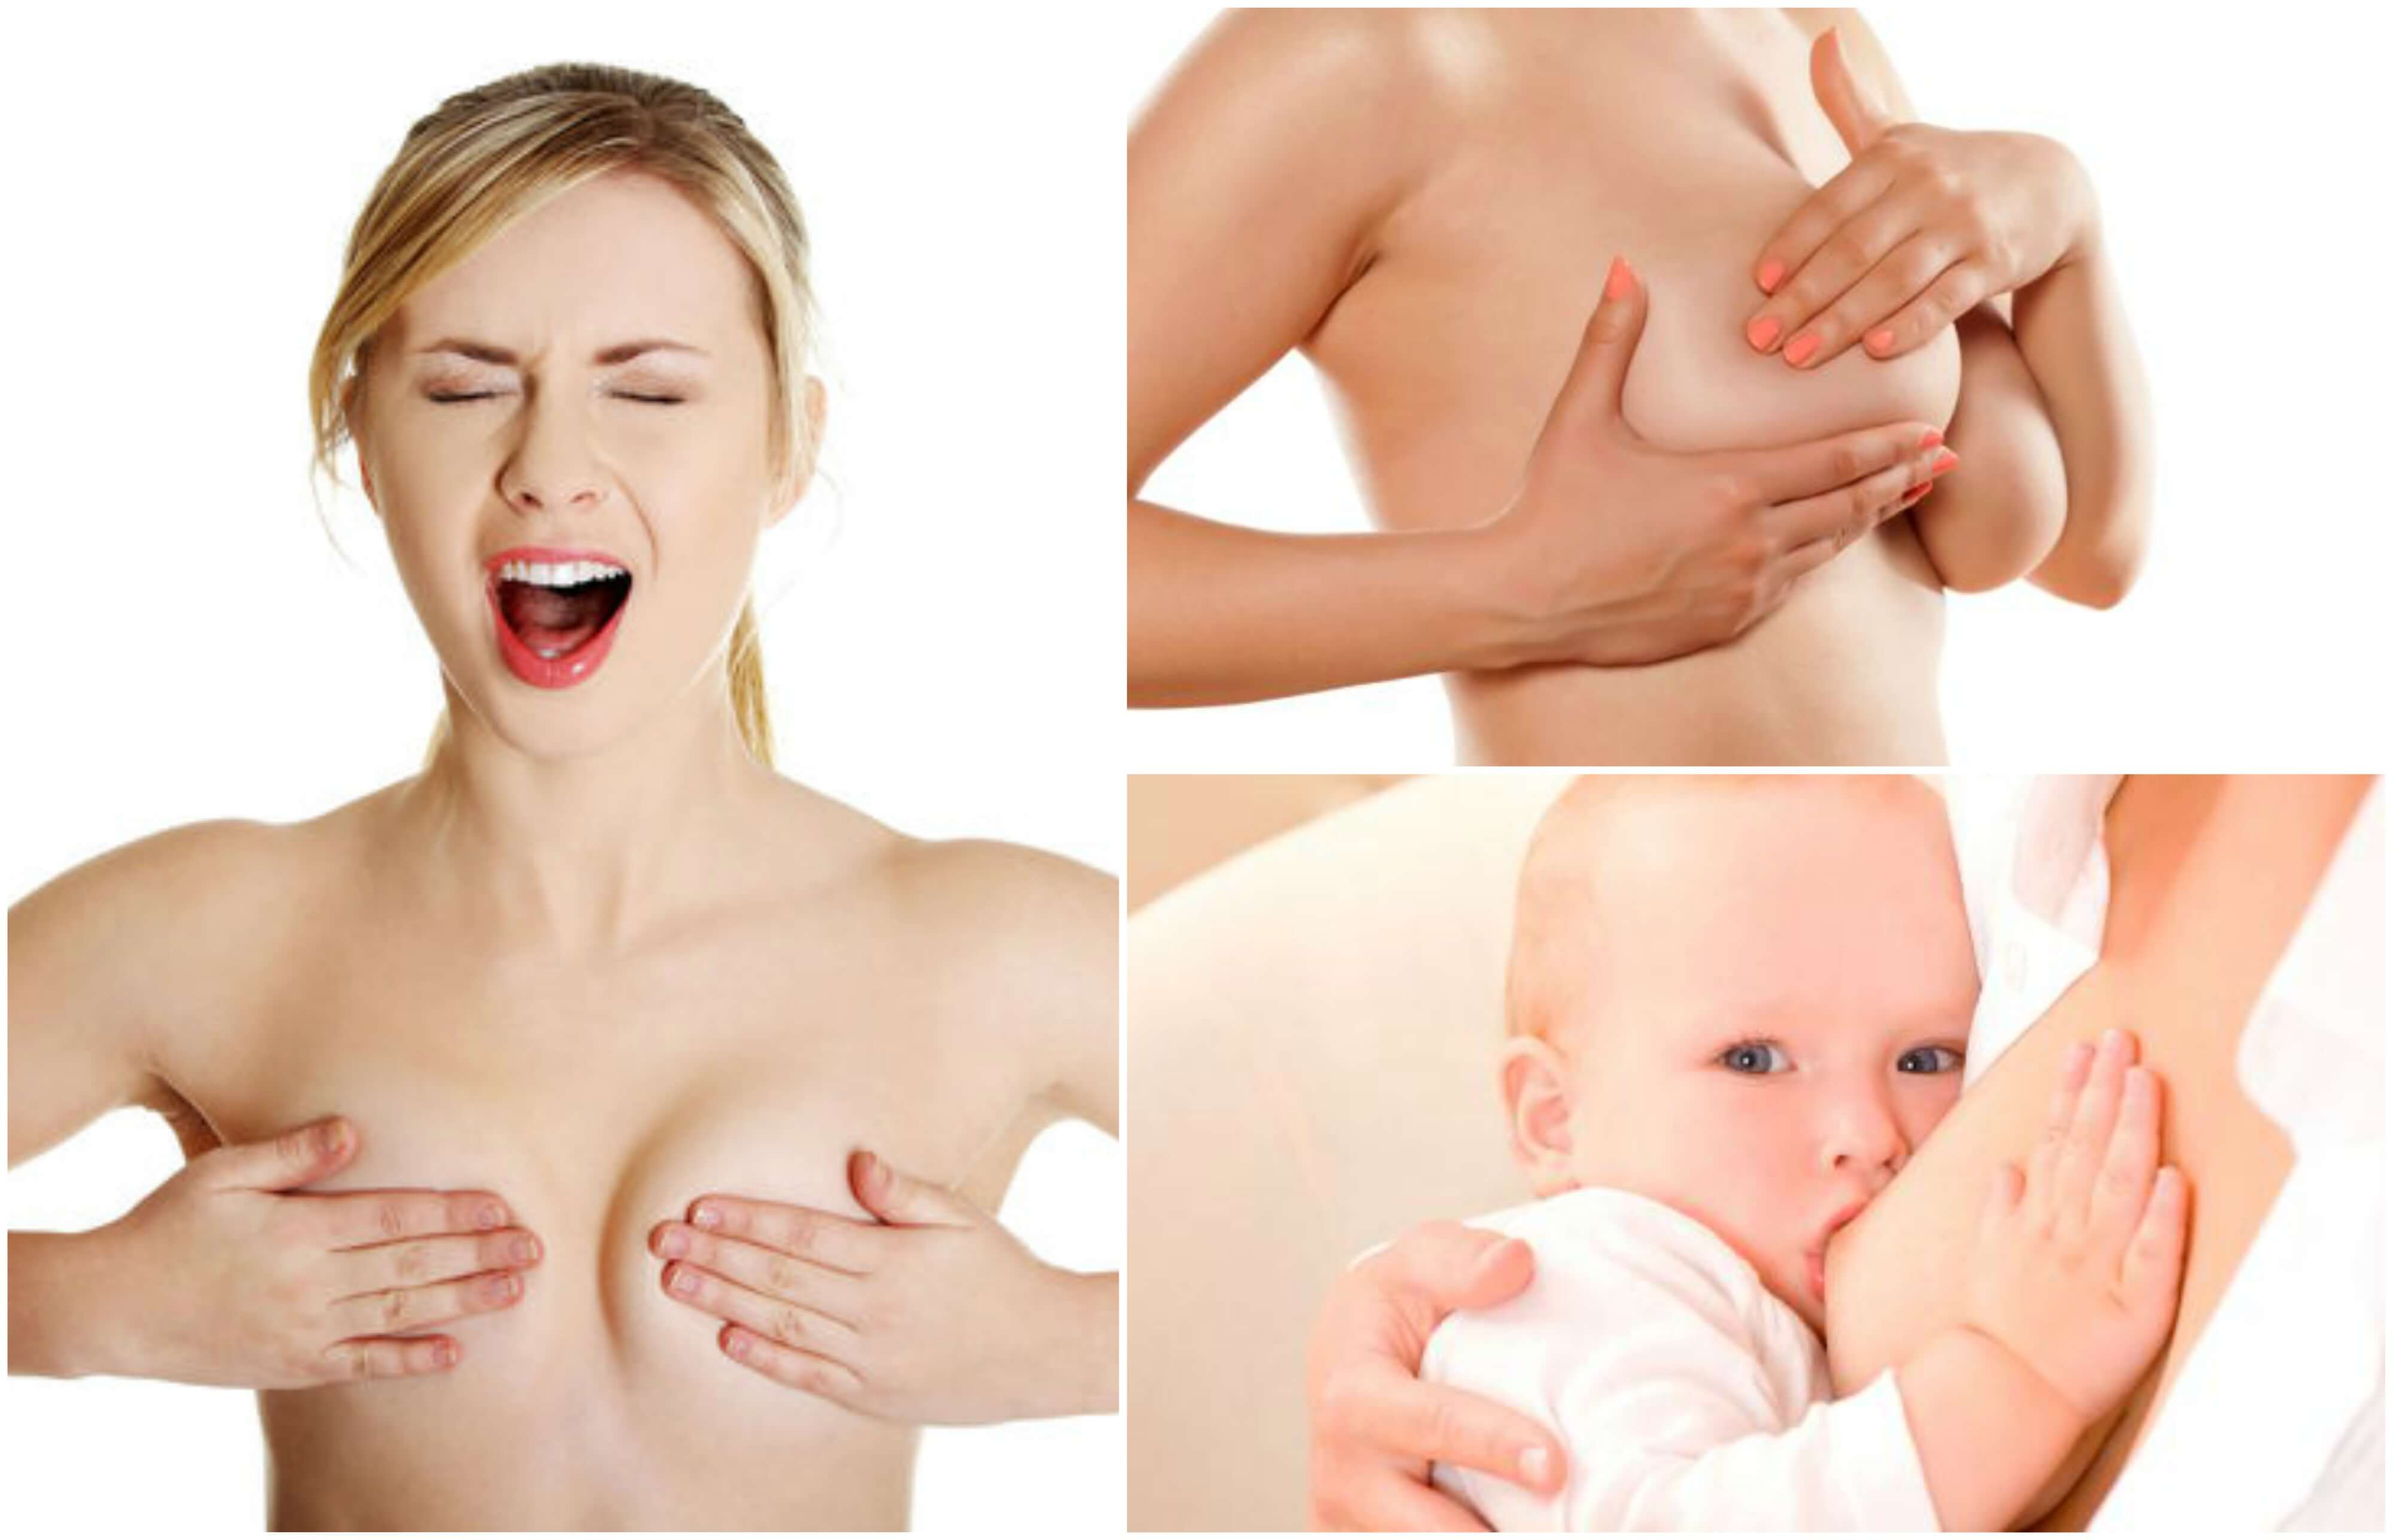 Why Do My Breasts Hurt?